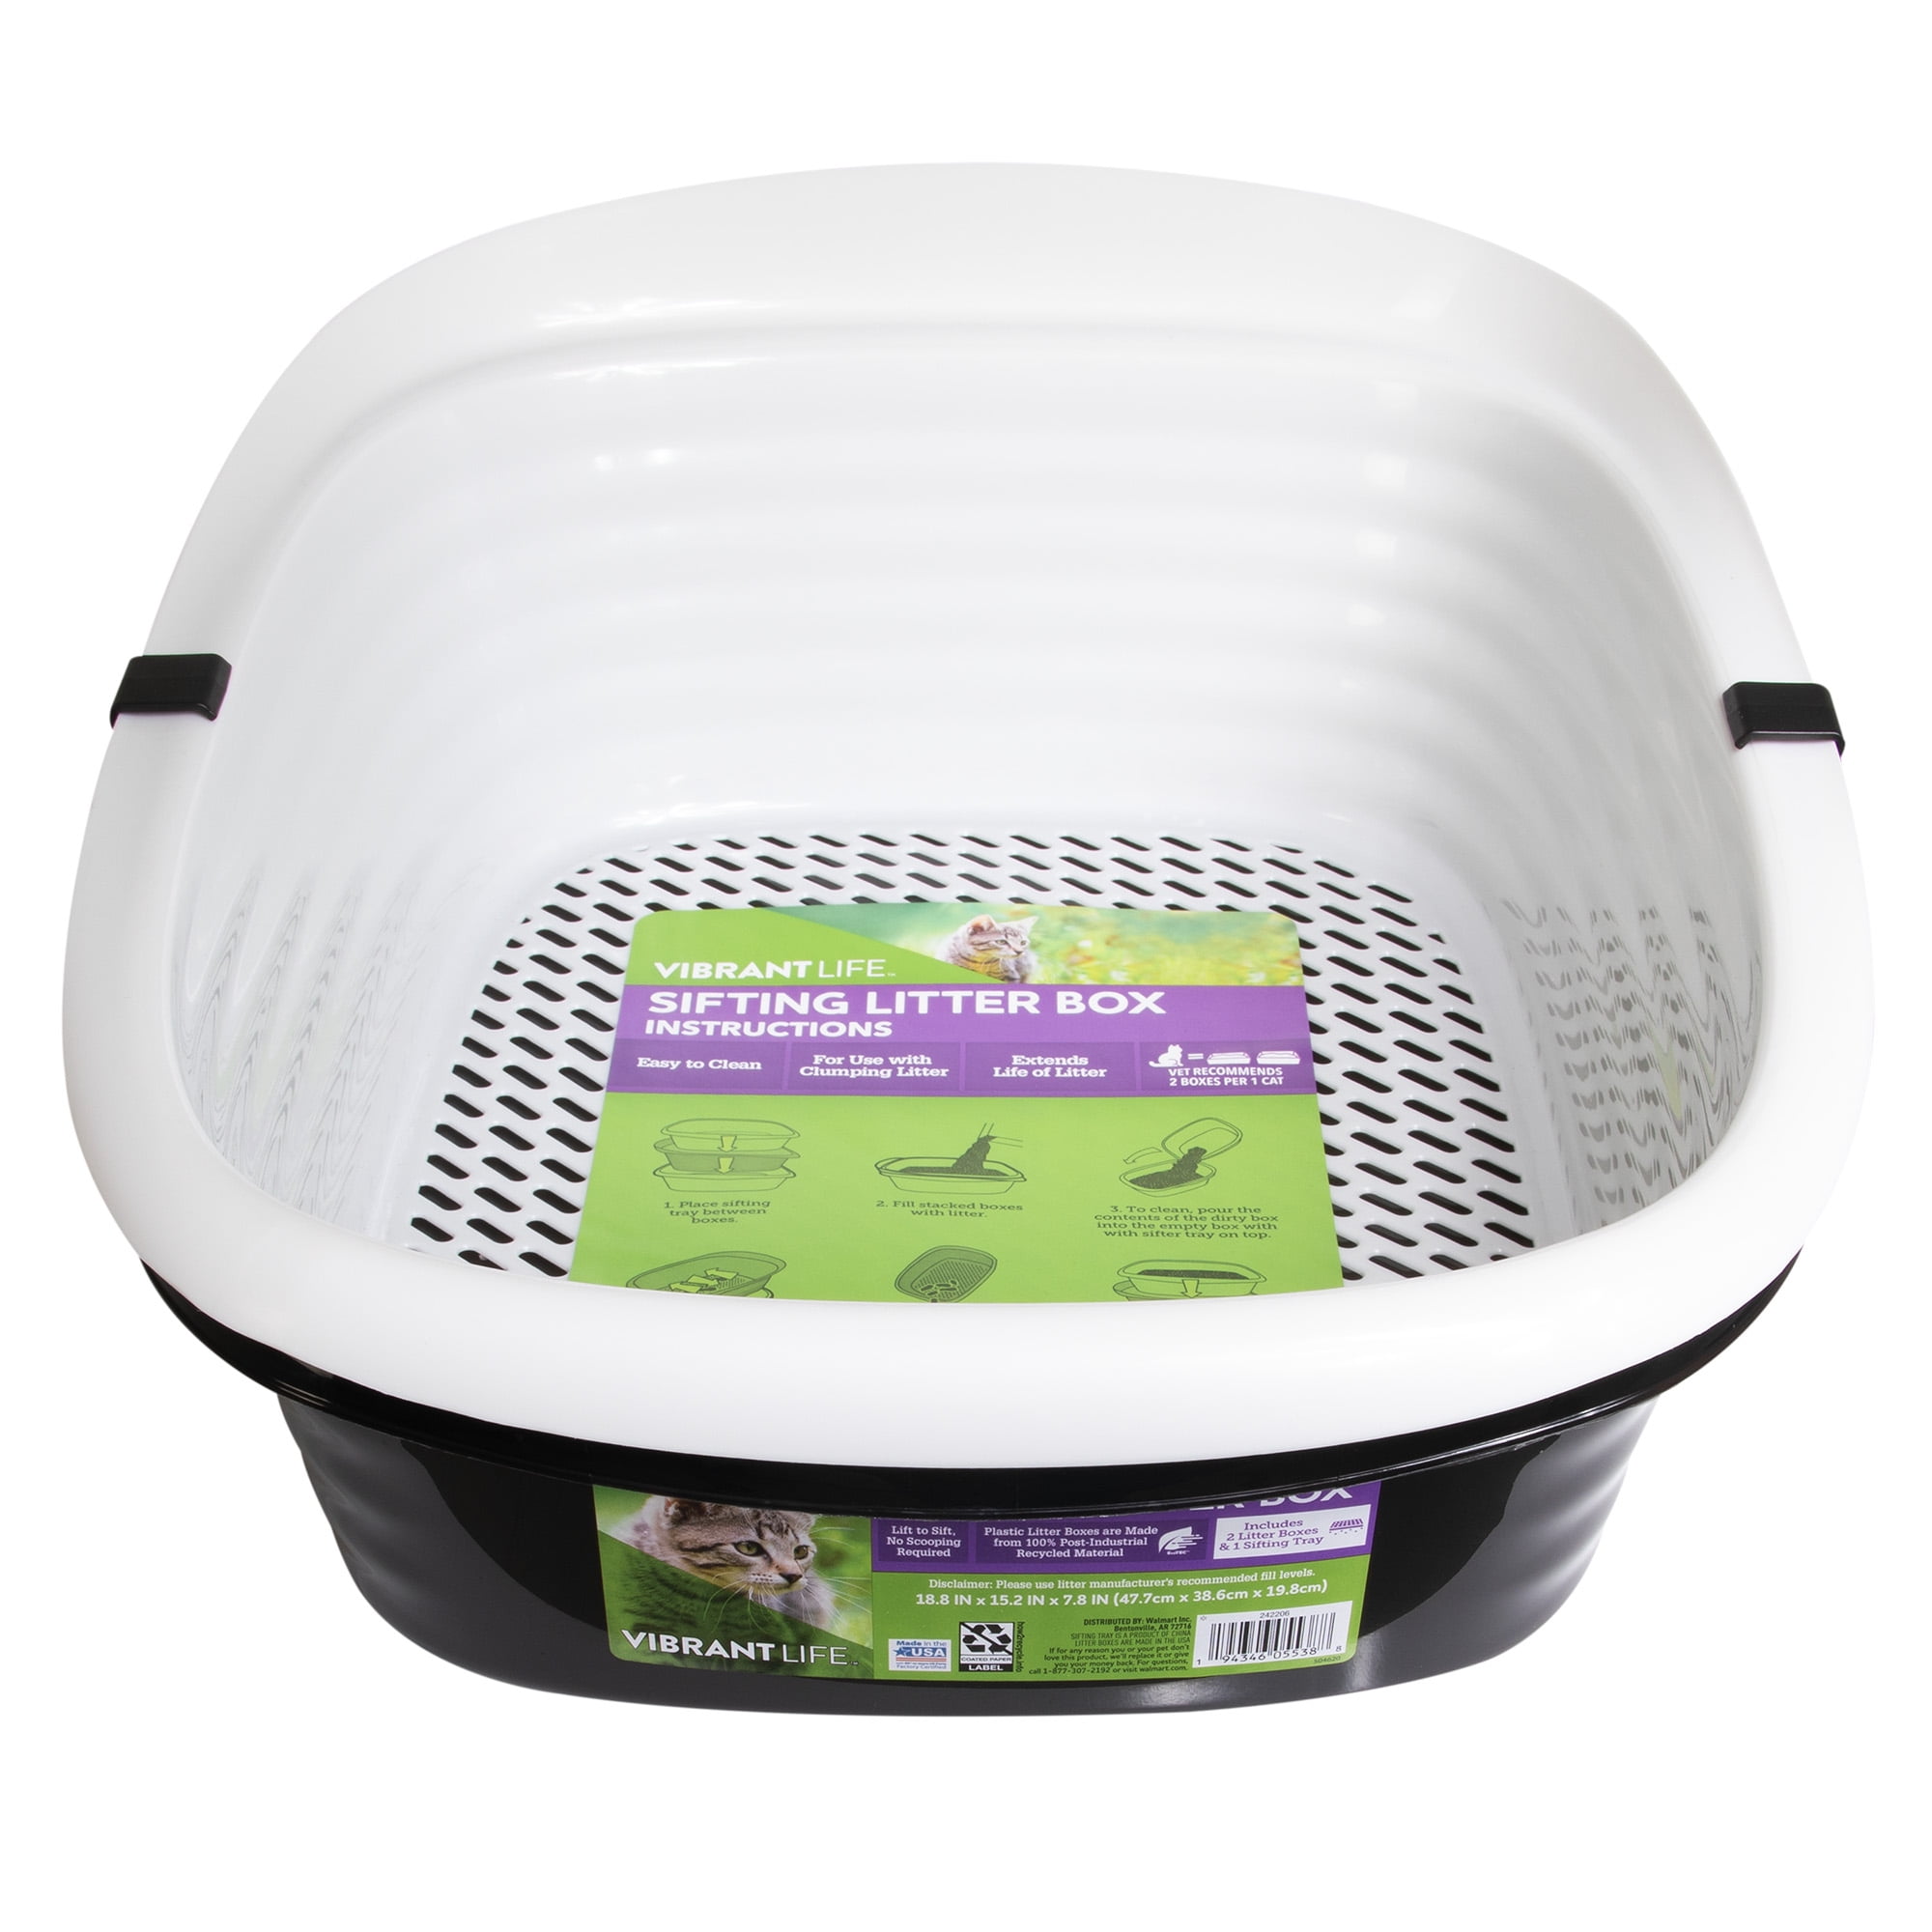 sifting litter boxes for cats